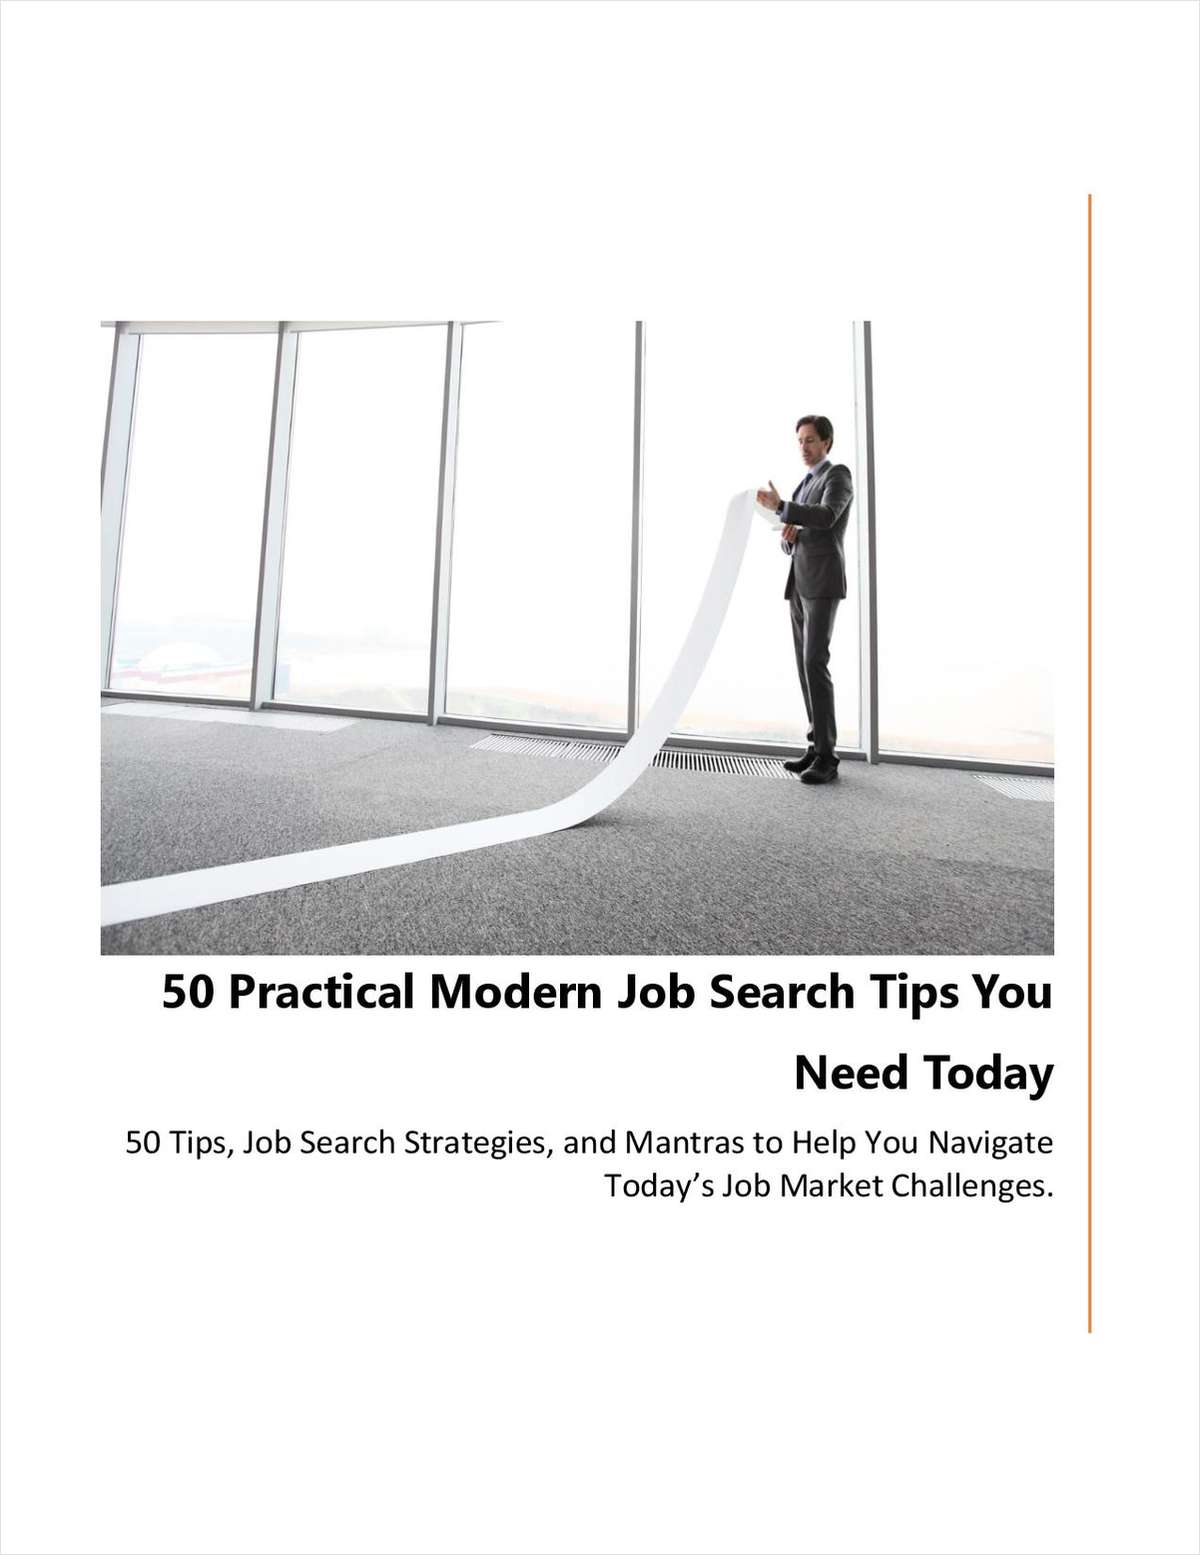 50 Practical Modern Job Search Tips You Need Today